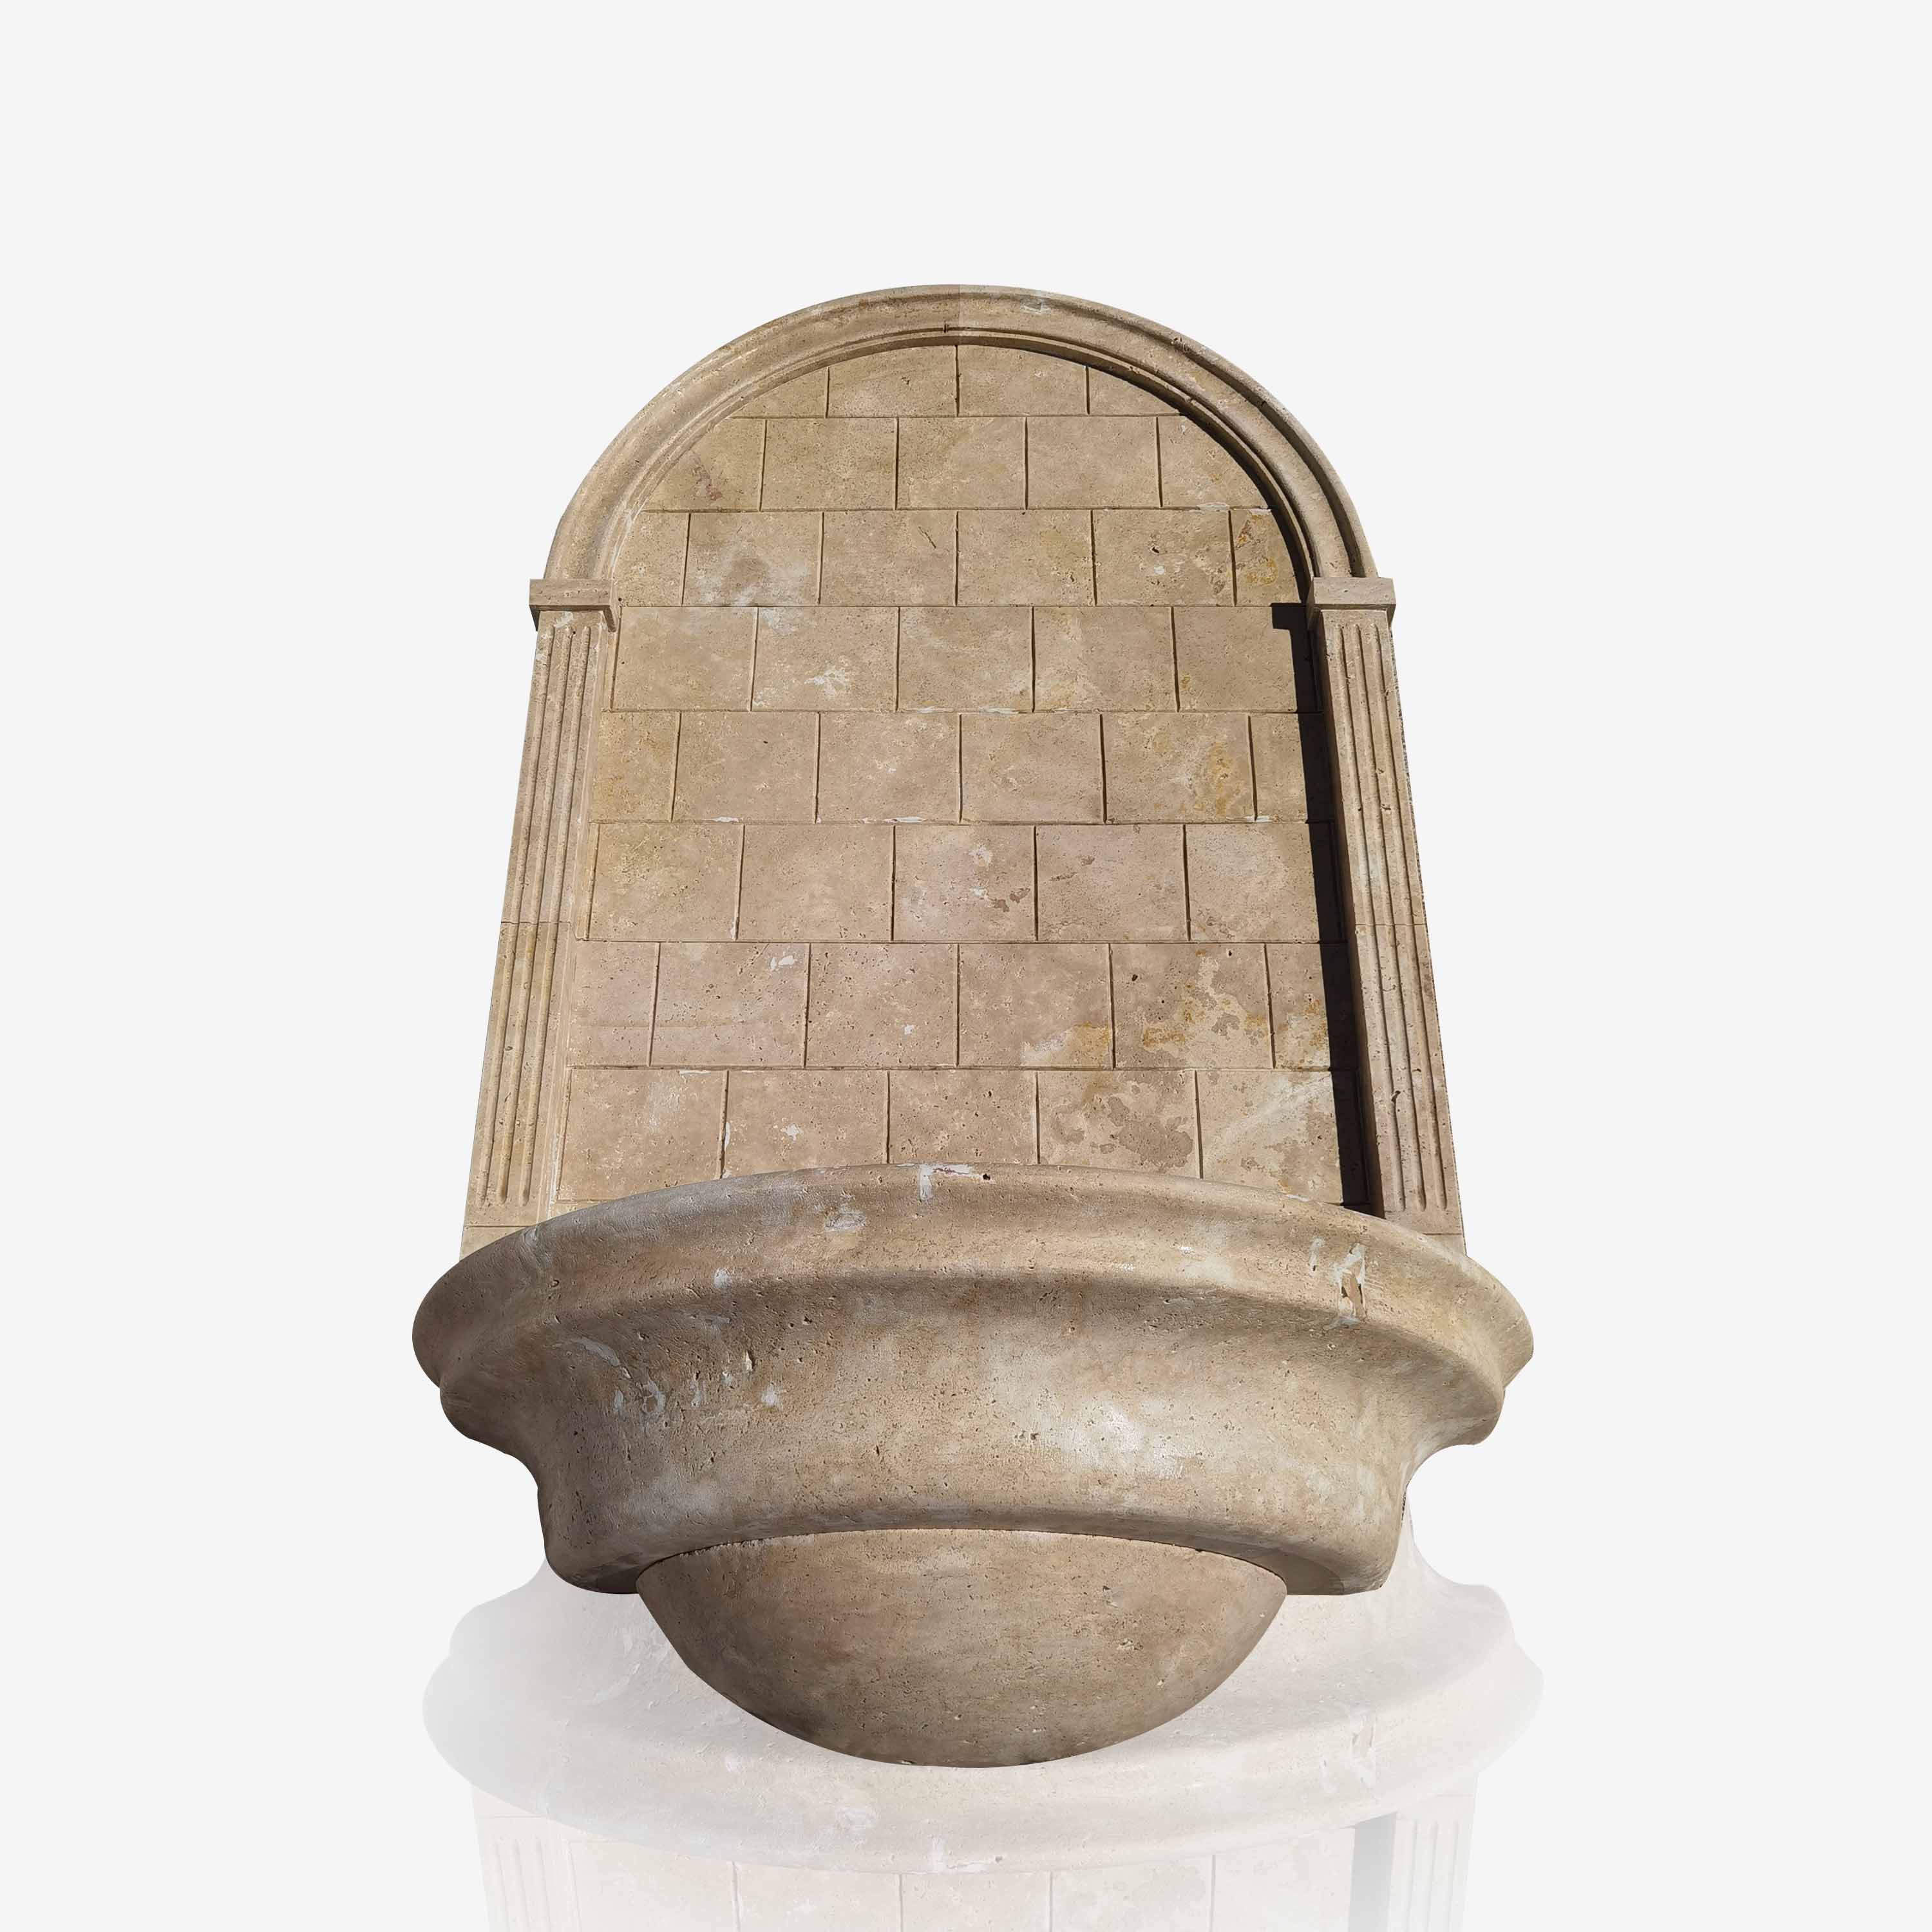 Beige Travertine Wall Fountain with Basin